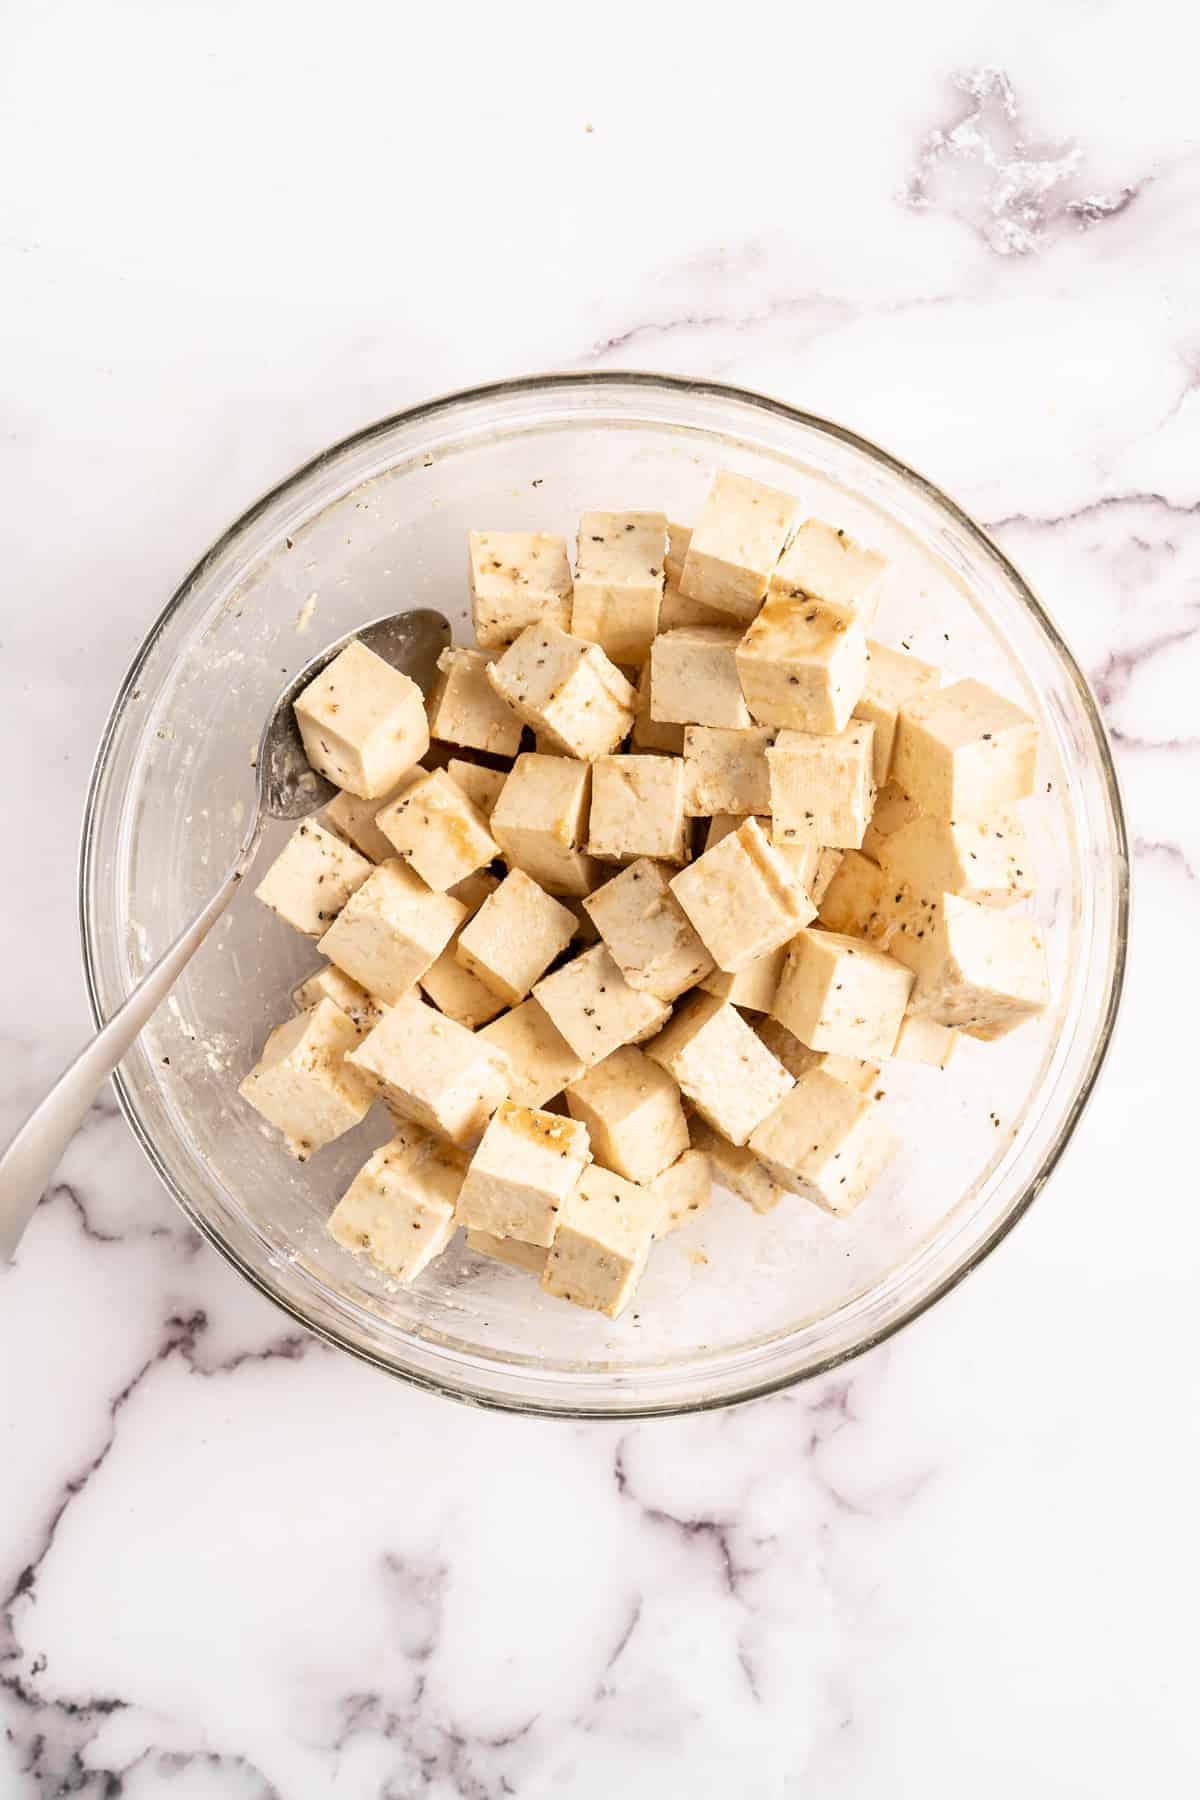 Tofu being coated in glass mixing bowl